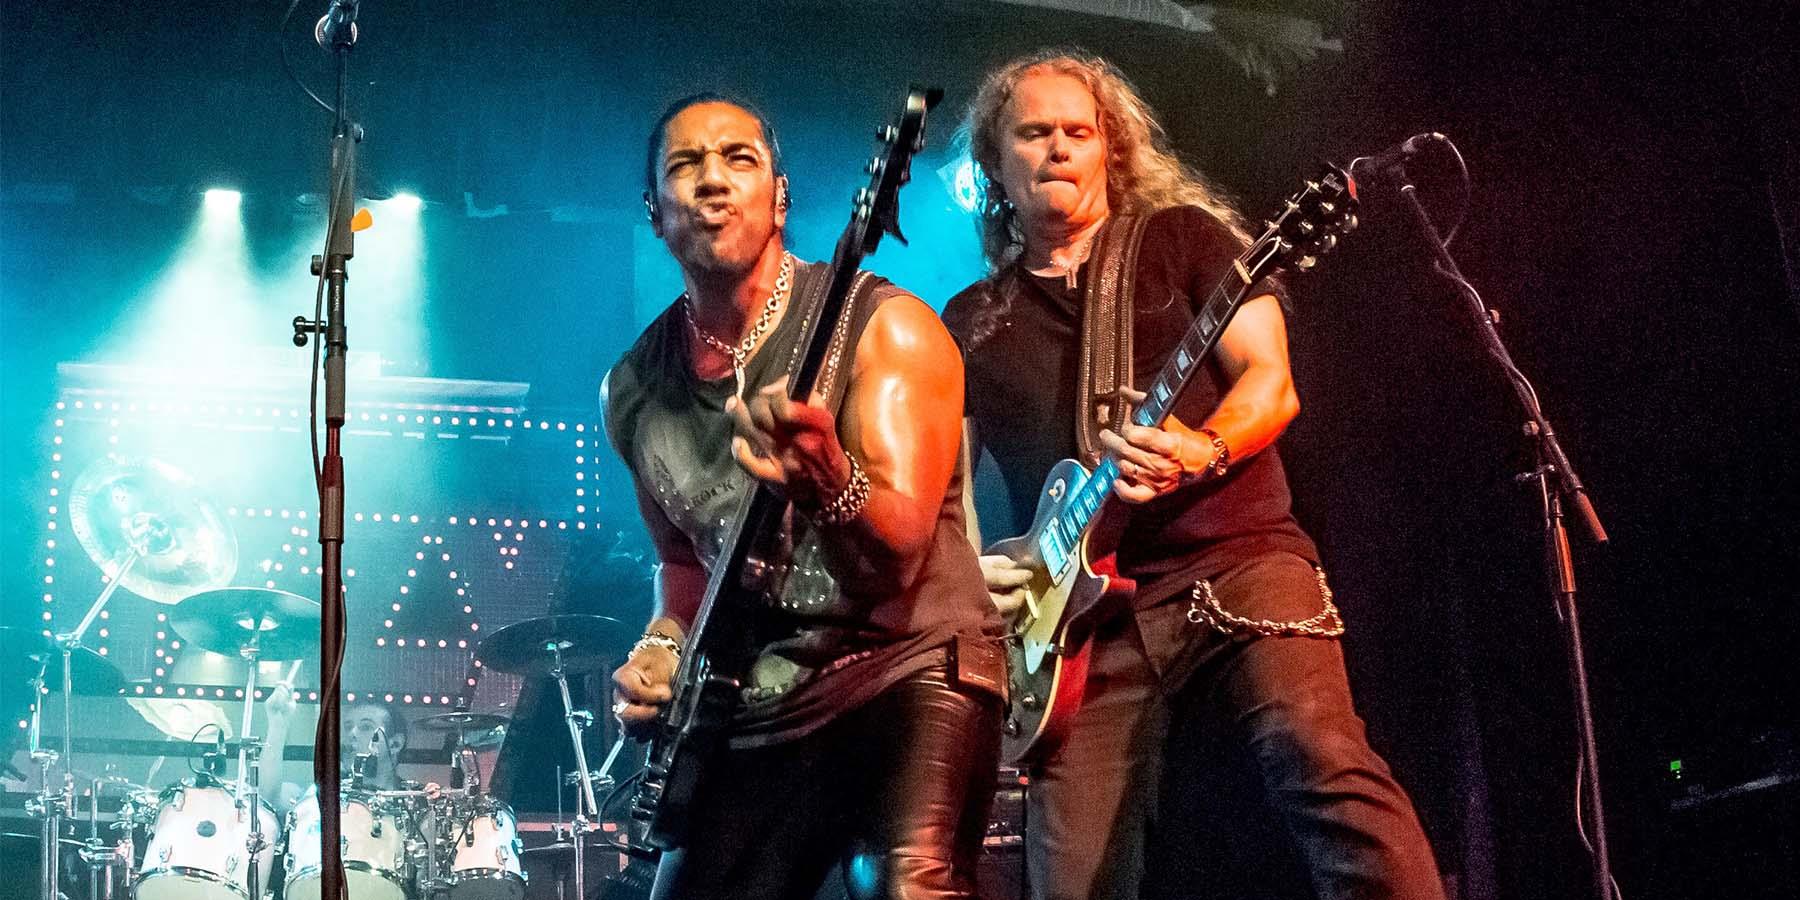 Limehouse Lizzy on stage